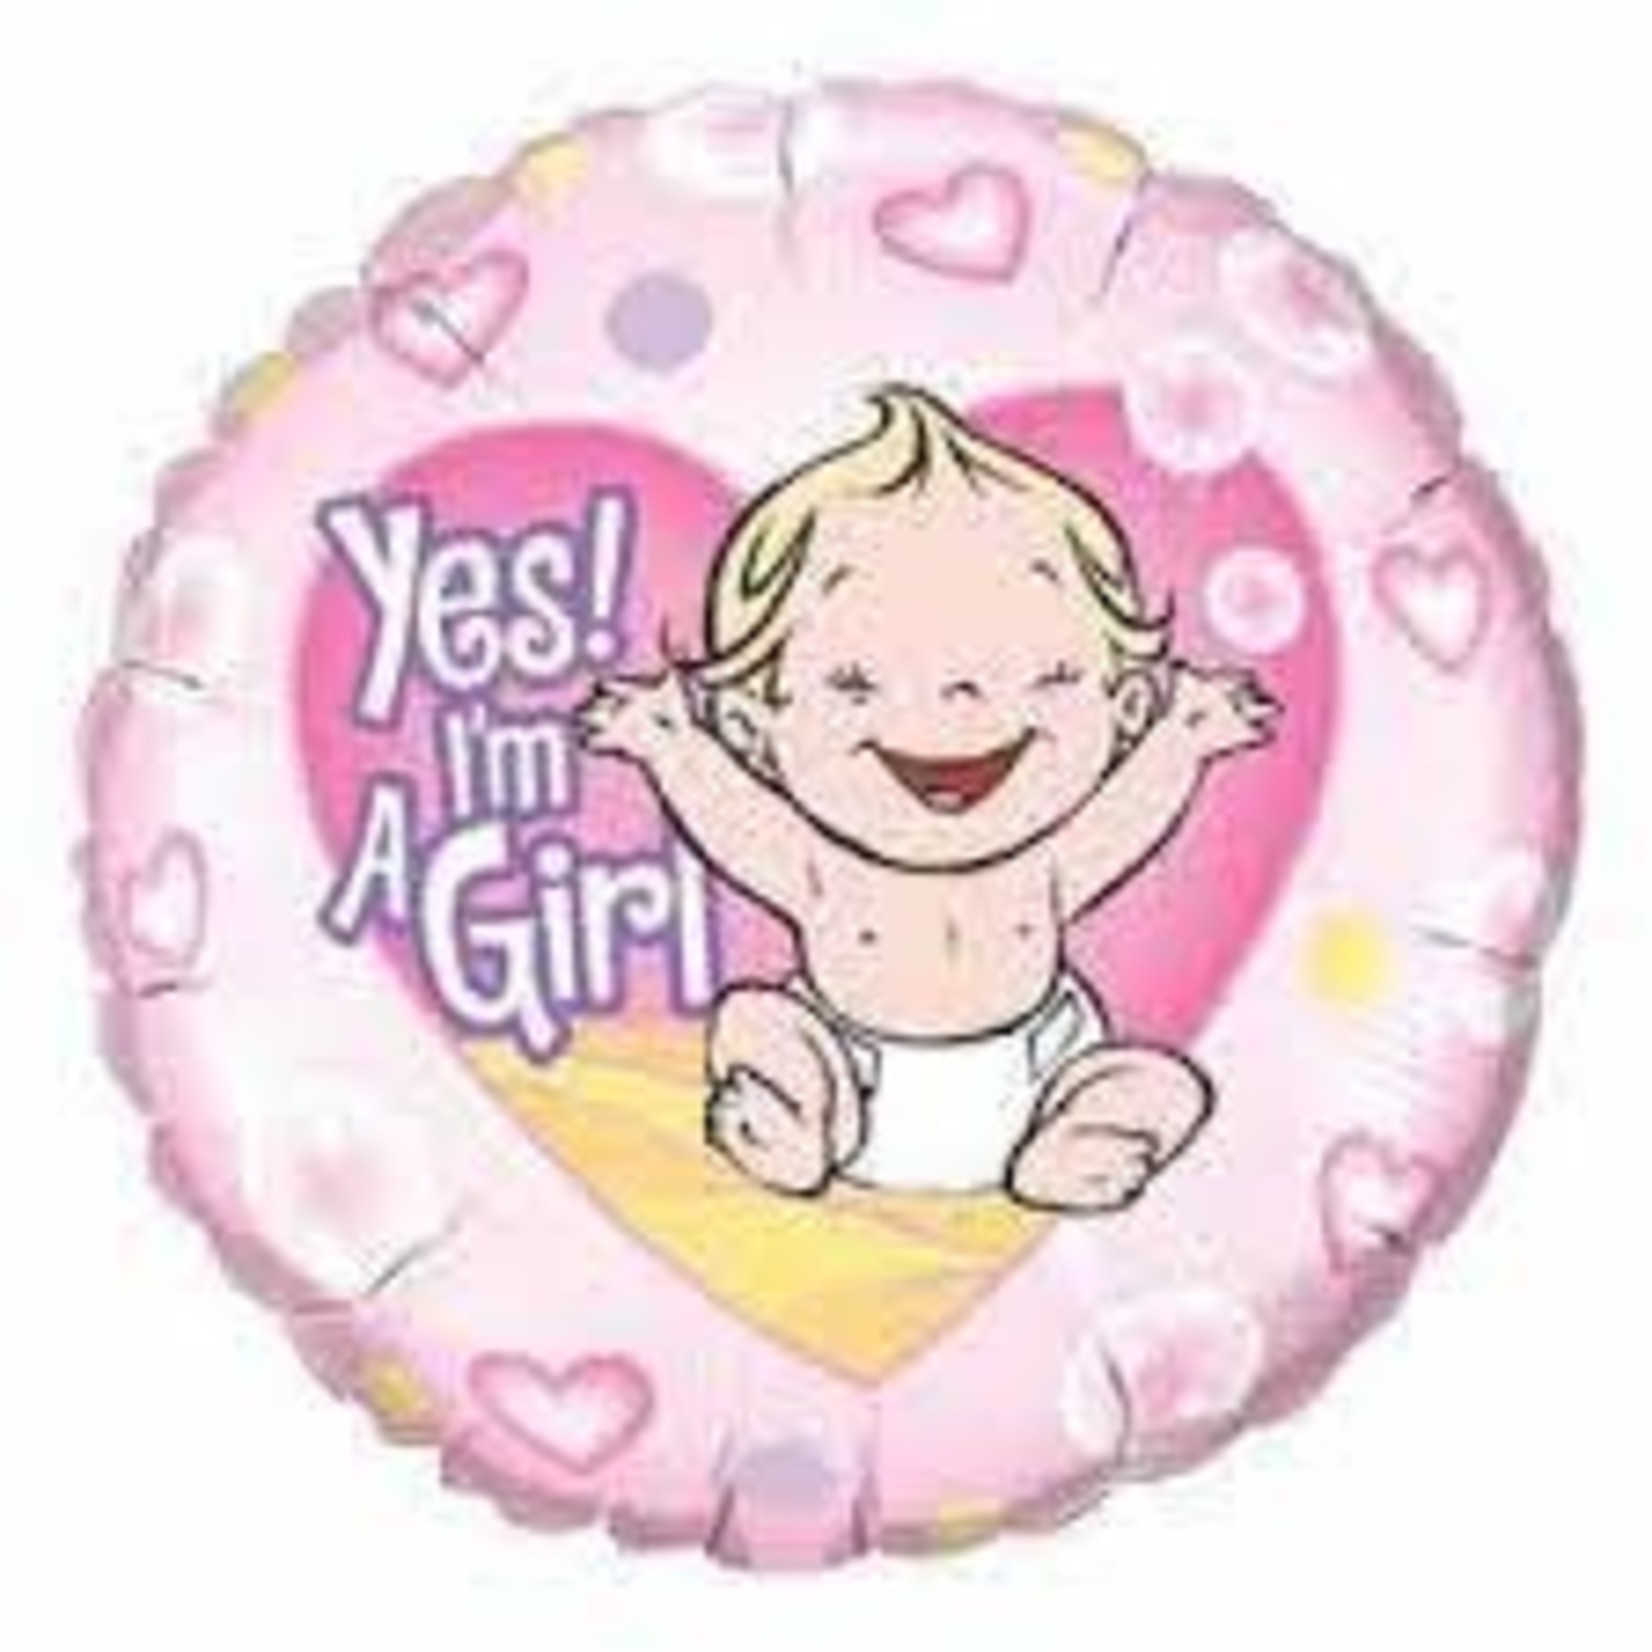 18" 'Yes! I'm a girl' Round